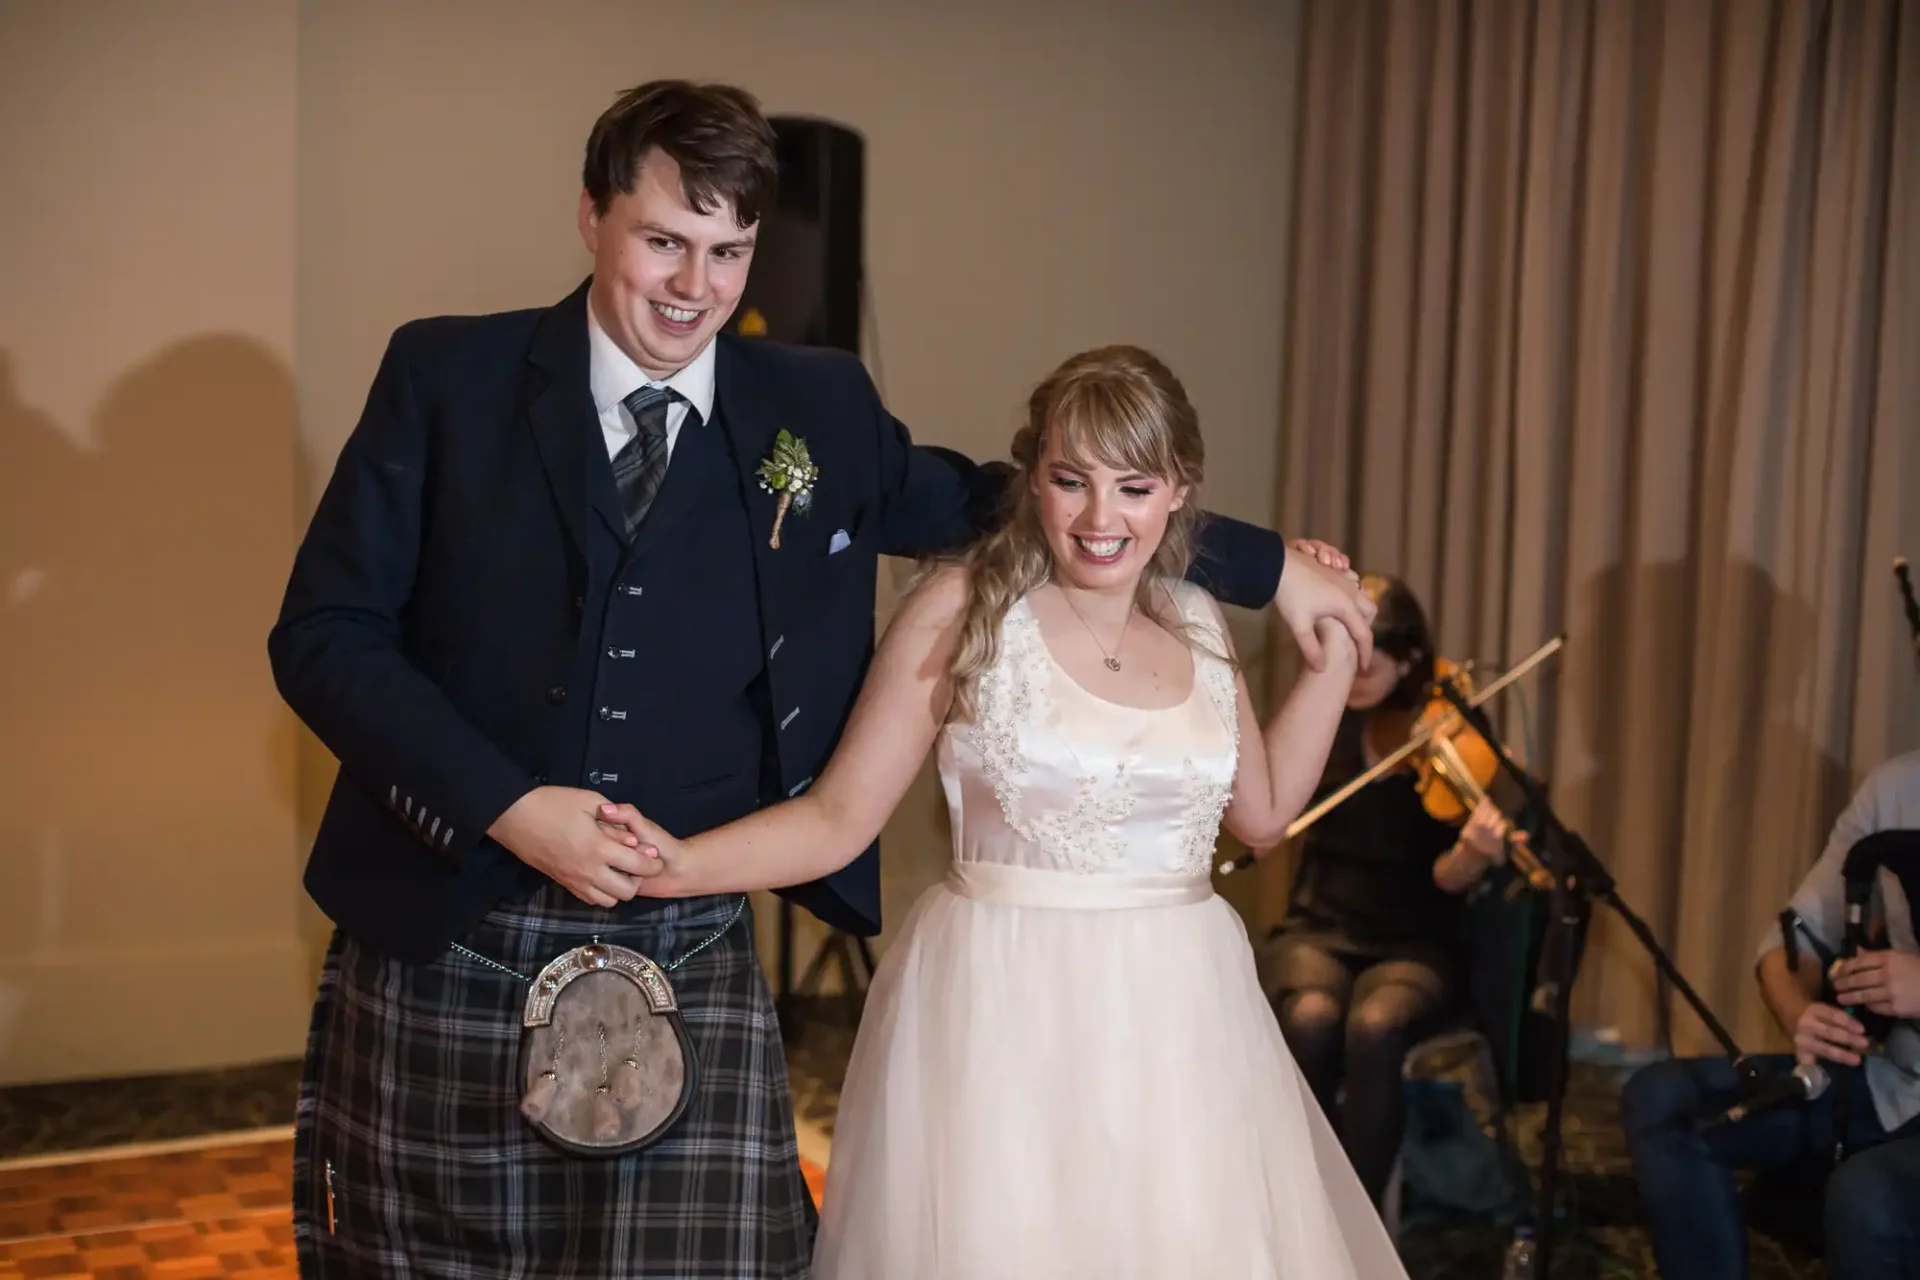 A bride and groom smiling and dancing, the groom wearing a kilt and the bride in a white dress, with a violinist playing in the background.